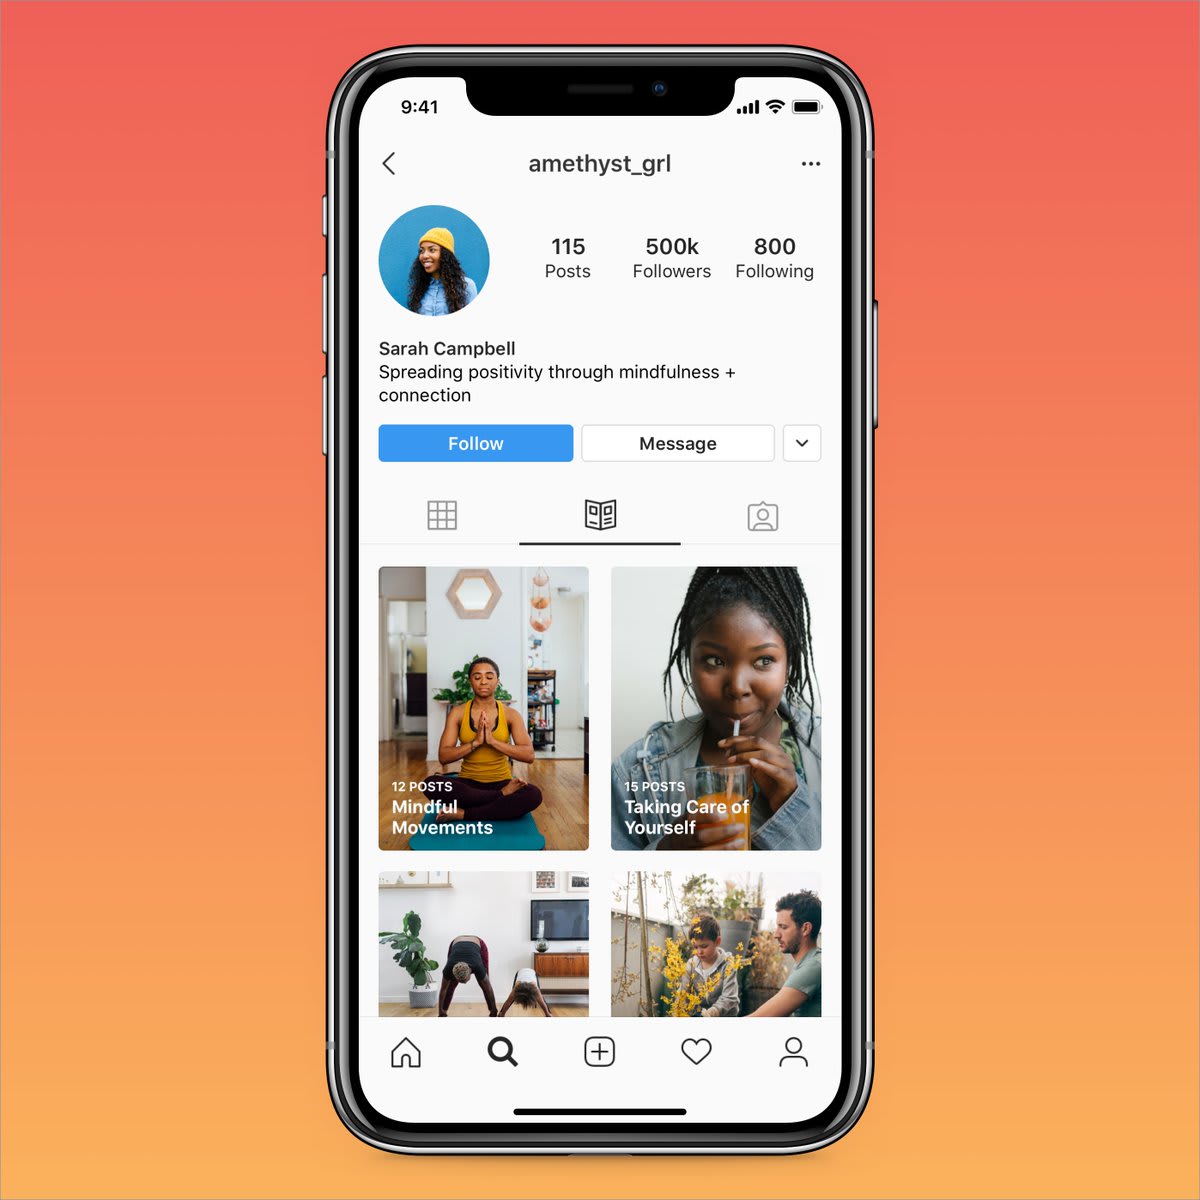 Starting today, you can check out Guides – a new way to discover recommendations from people on Instagram. 🙌 The first Guides focus on wellness and mental health content from respected organizations and creators. ❤️ Find out more: